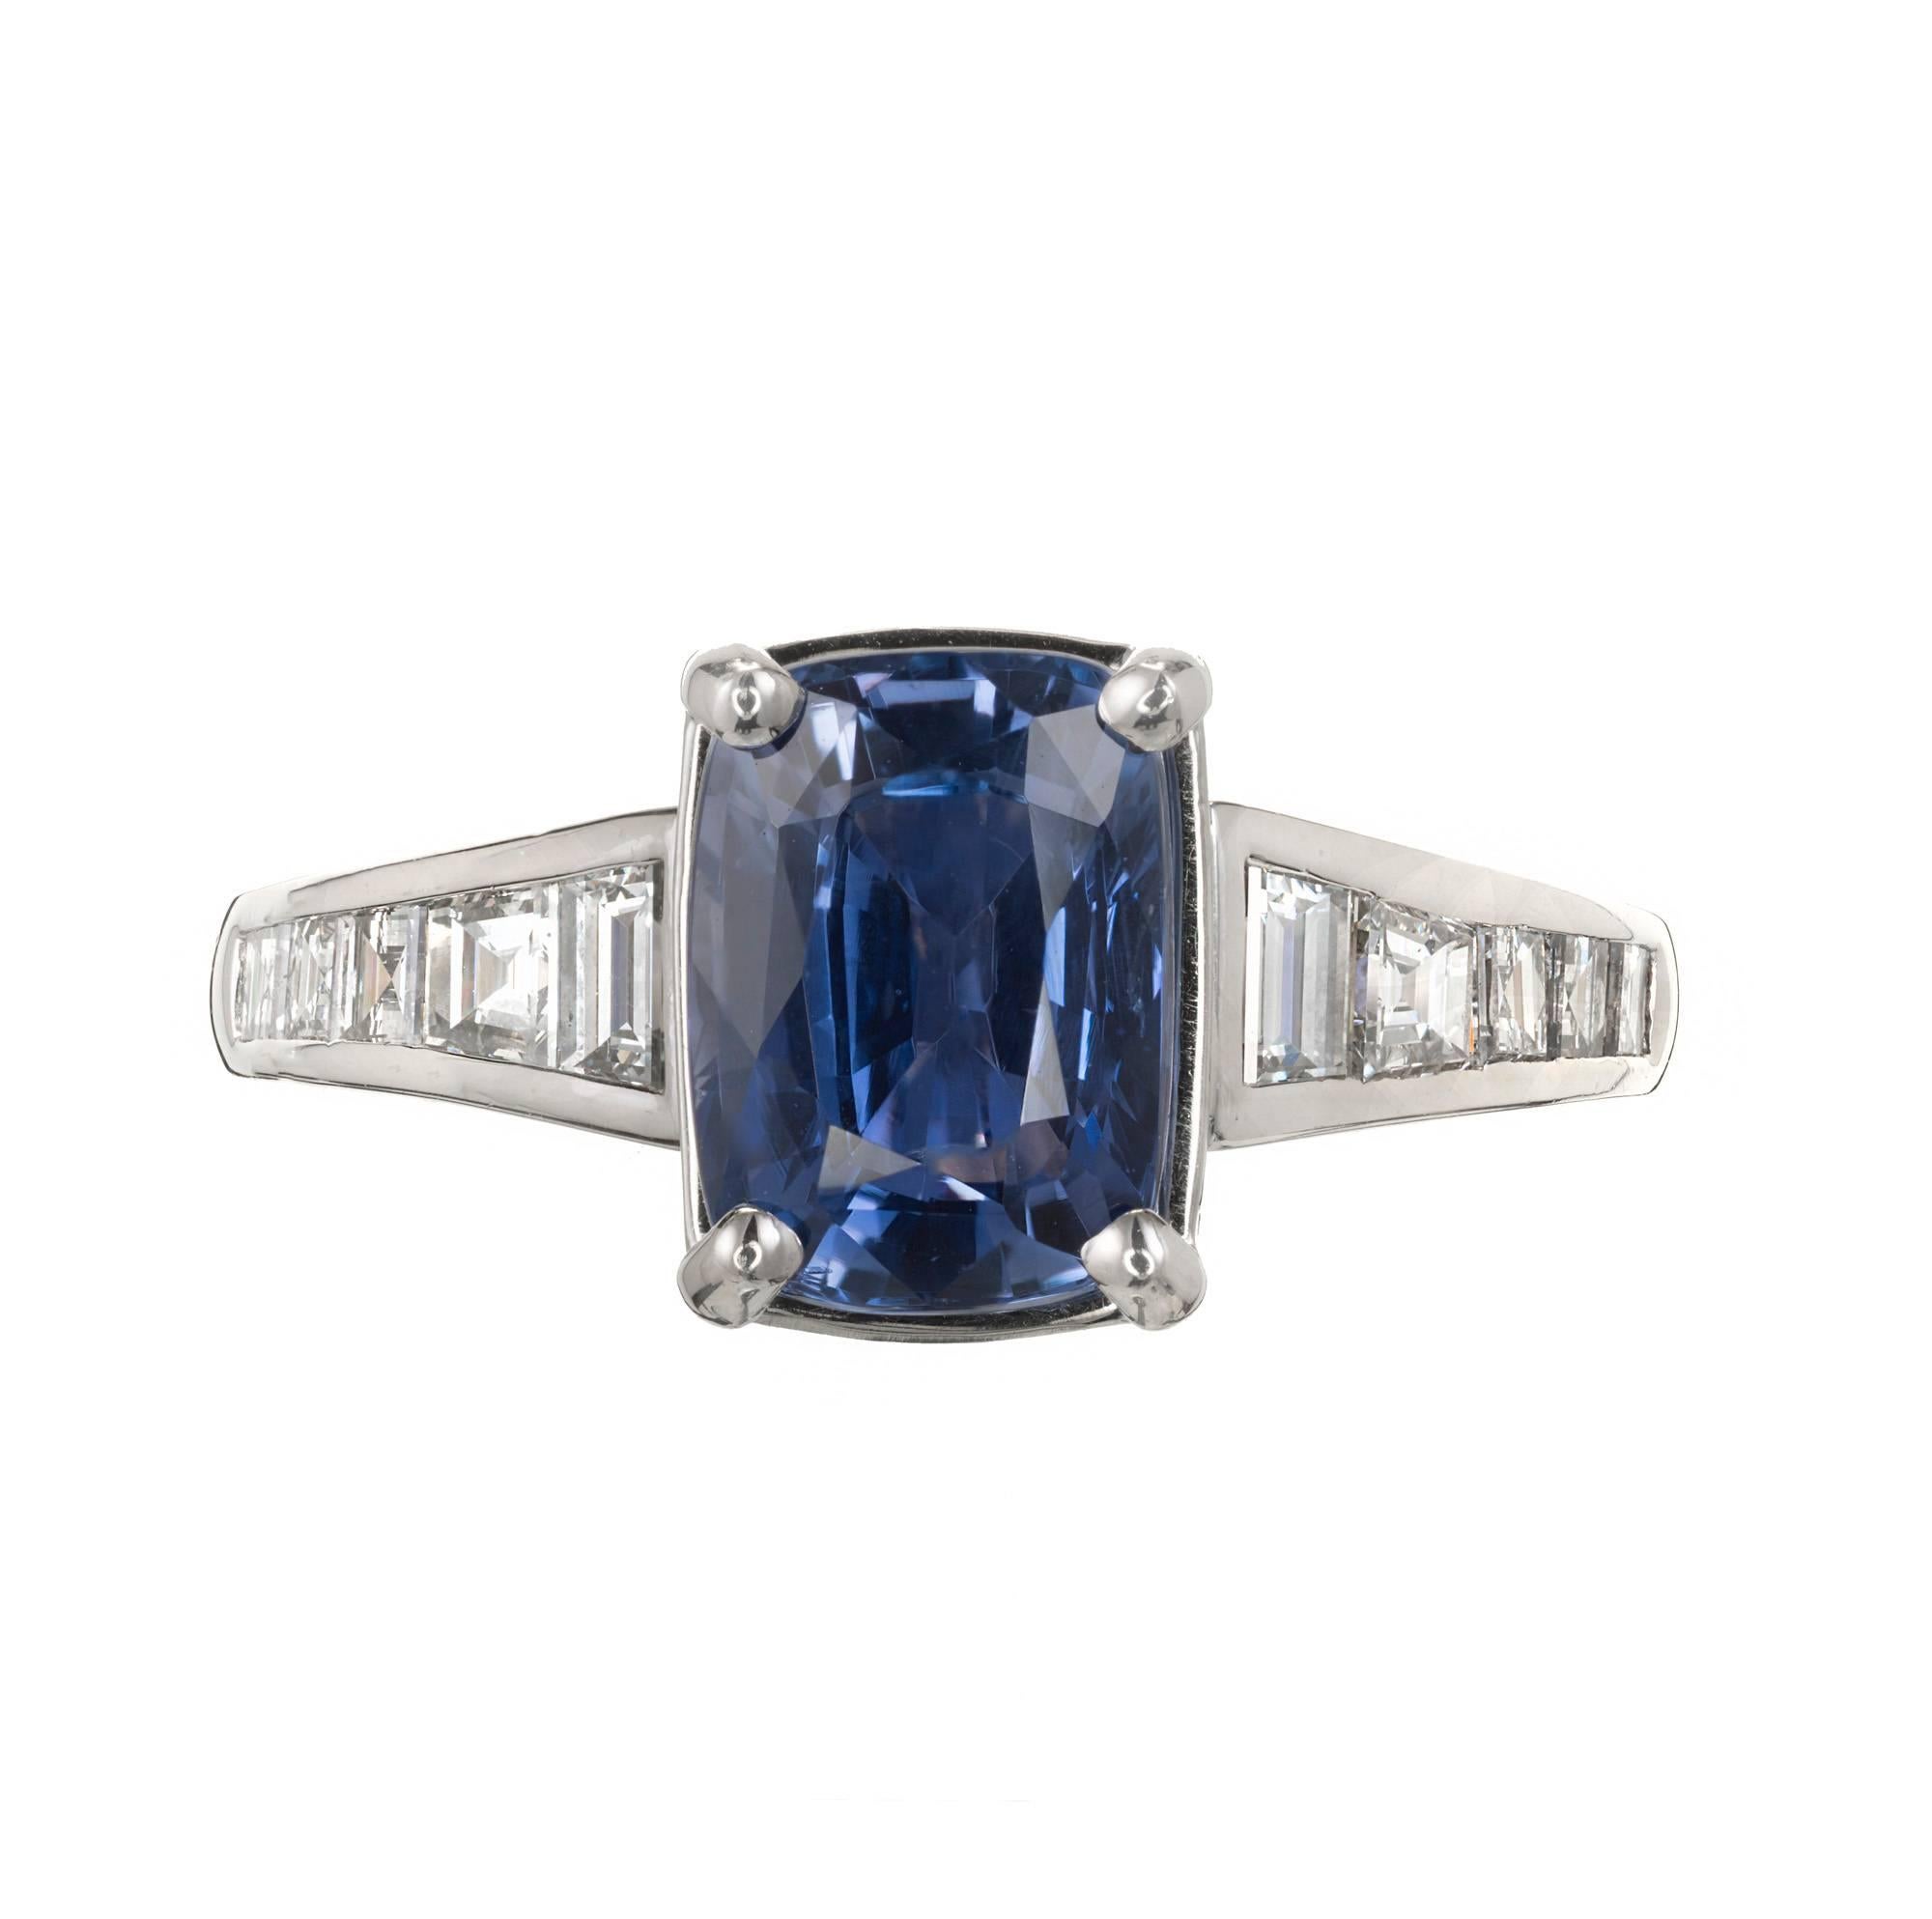 GIA certified violet blue cushion cut natural untreated Sapphire and trapezoid and square diamond in a Sasha Primak setting. Sasha Primak style ER 84

1 cushion blue Sapphire, approx. total weight 3.03cts, GIA certificate #1162423595
10 trapezoid &